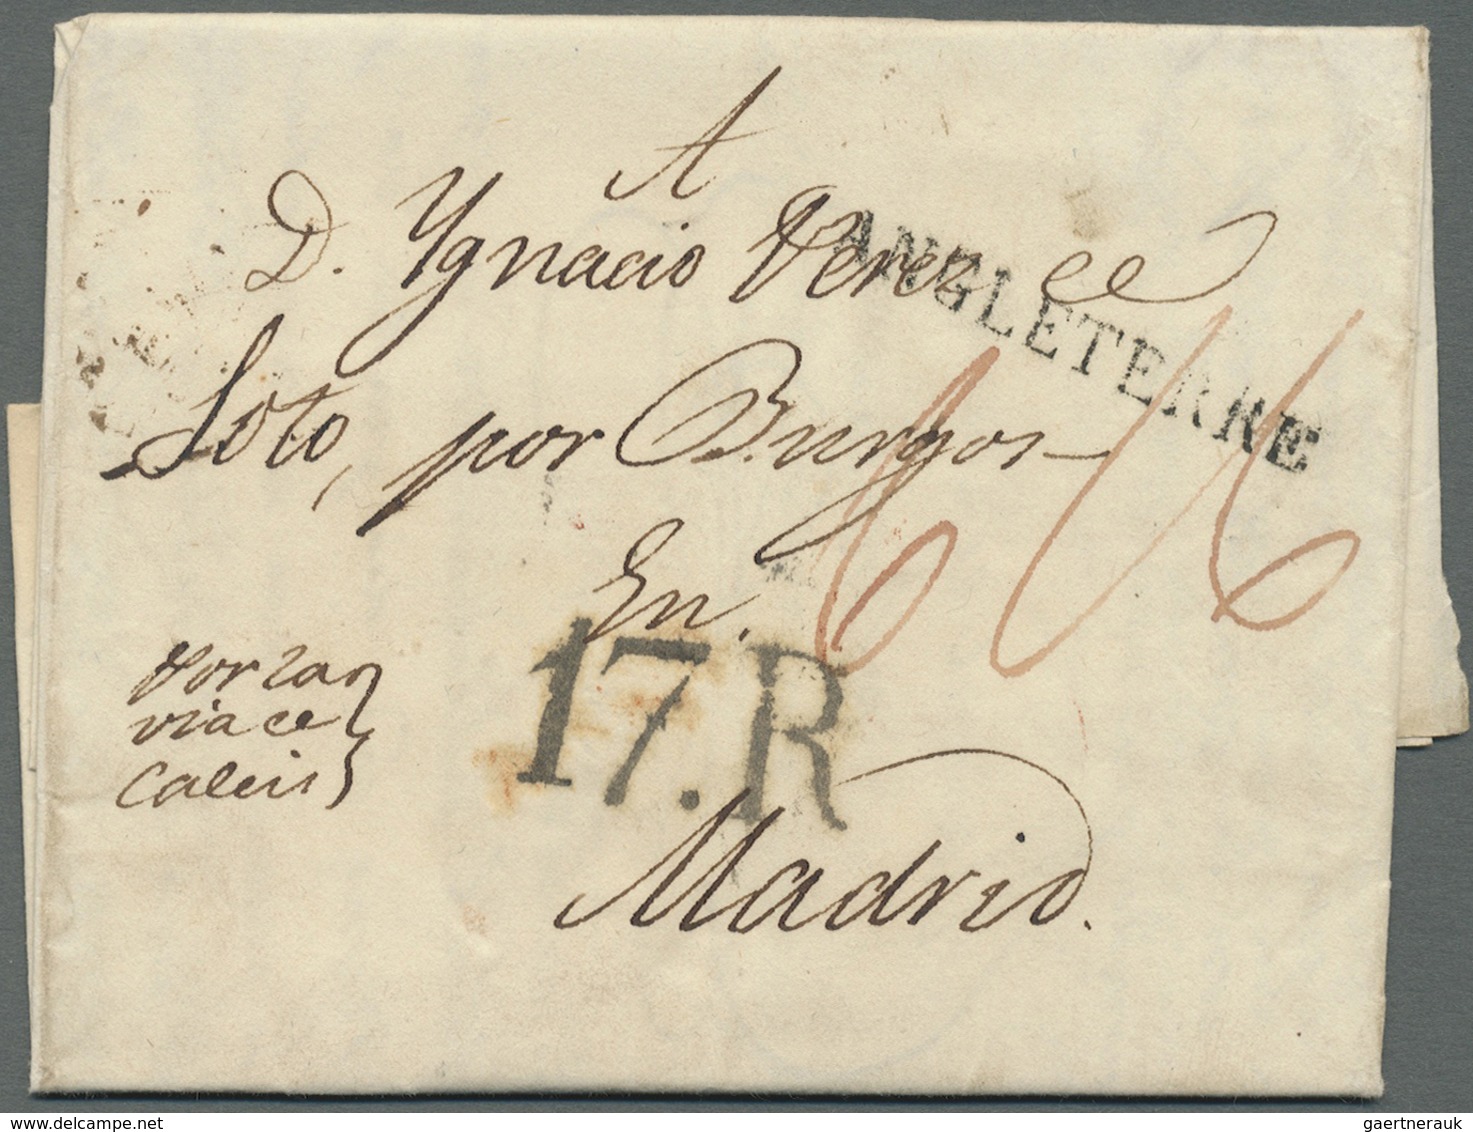 Br Großbritannien - Vorphilatelie: 1791/1850 ca., 360 early covers with a great variety of cancellation